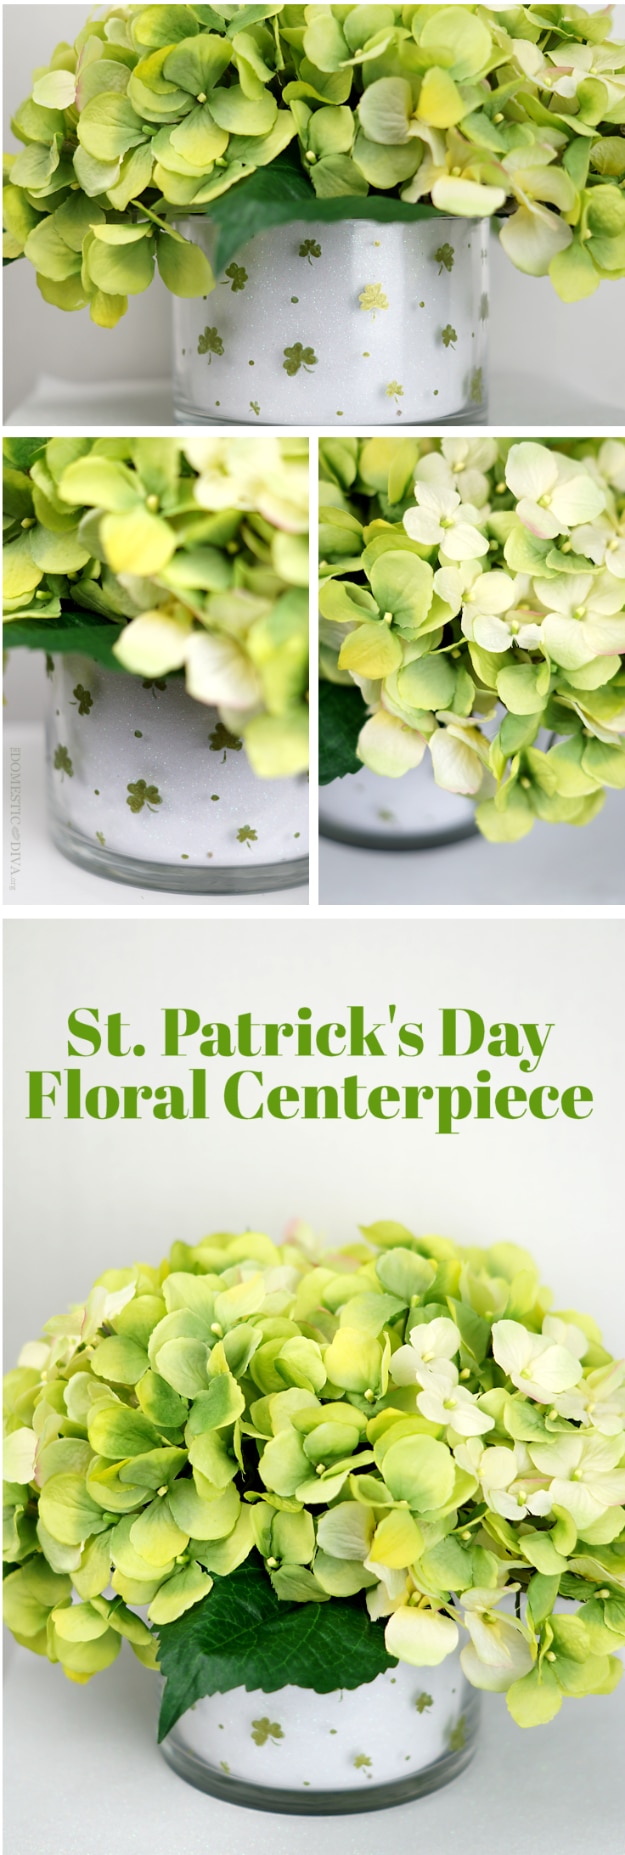 DIY St Patricks Day Ideas - DIY Shamrock Floral Arrangement Centerpiece - Food and Best Recipes, Decorations and Home Decor, Party Ideas - Cupcakes, Drinks, Festive St Patrick Day Parties With these Easy, Quick and Cool Crafts and DIY Projects http://diyjoy.com/st-patricks-day-ideas